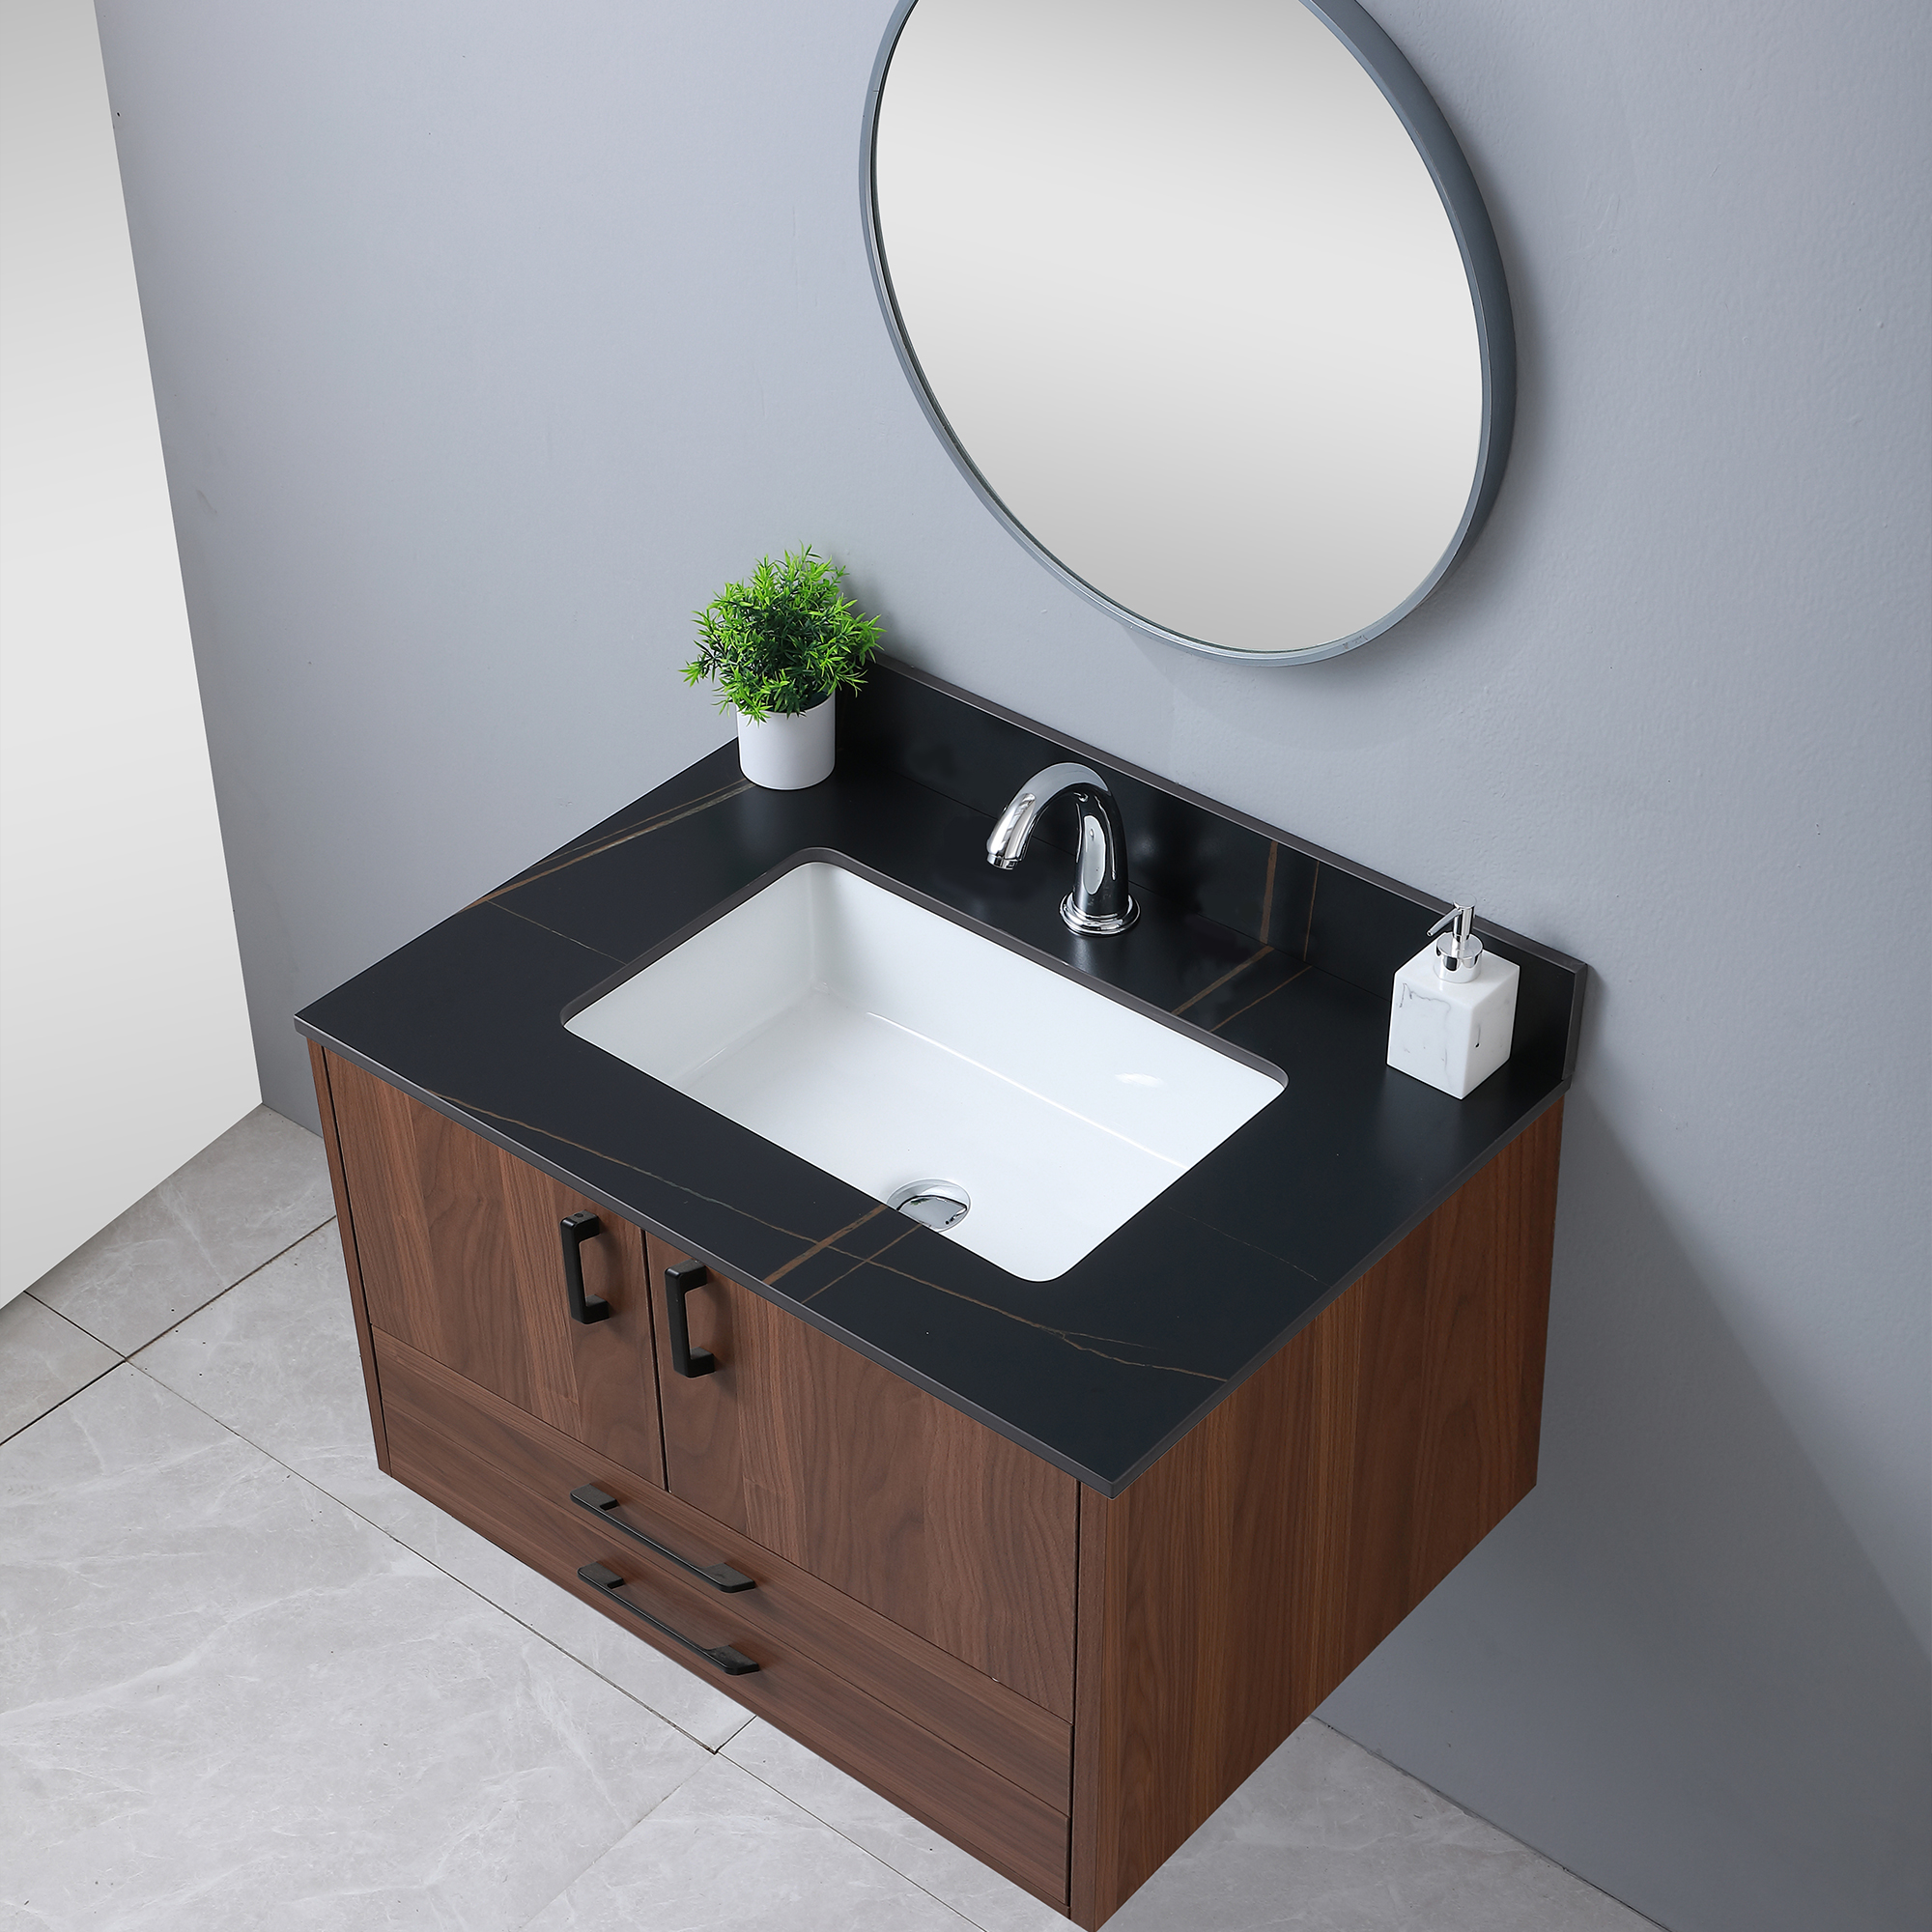 Montary 31" Sintered Stone Bathroom Vanity Top in Black Gold Color with Undermount Ceramic Sink and Single Faucet Hole with Backsplash